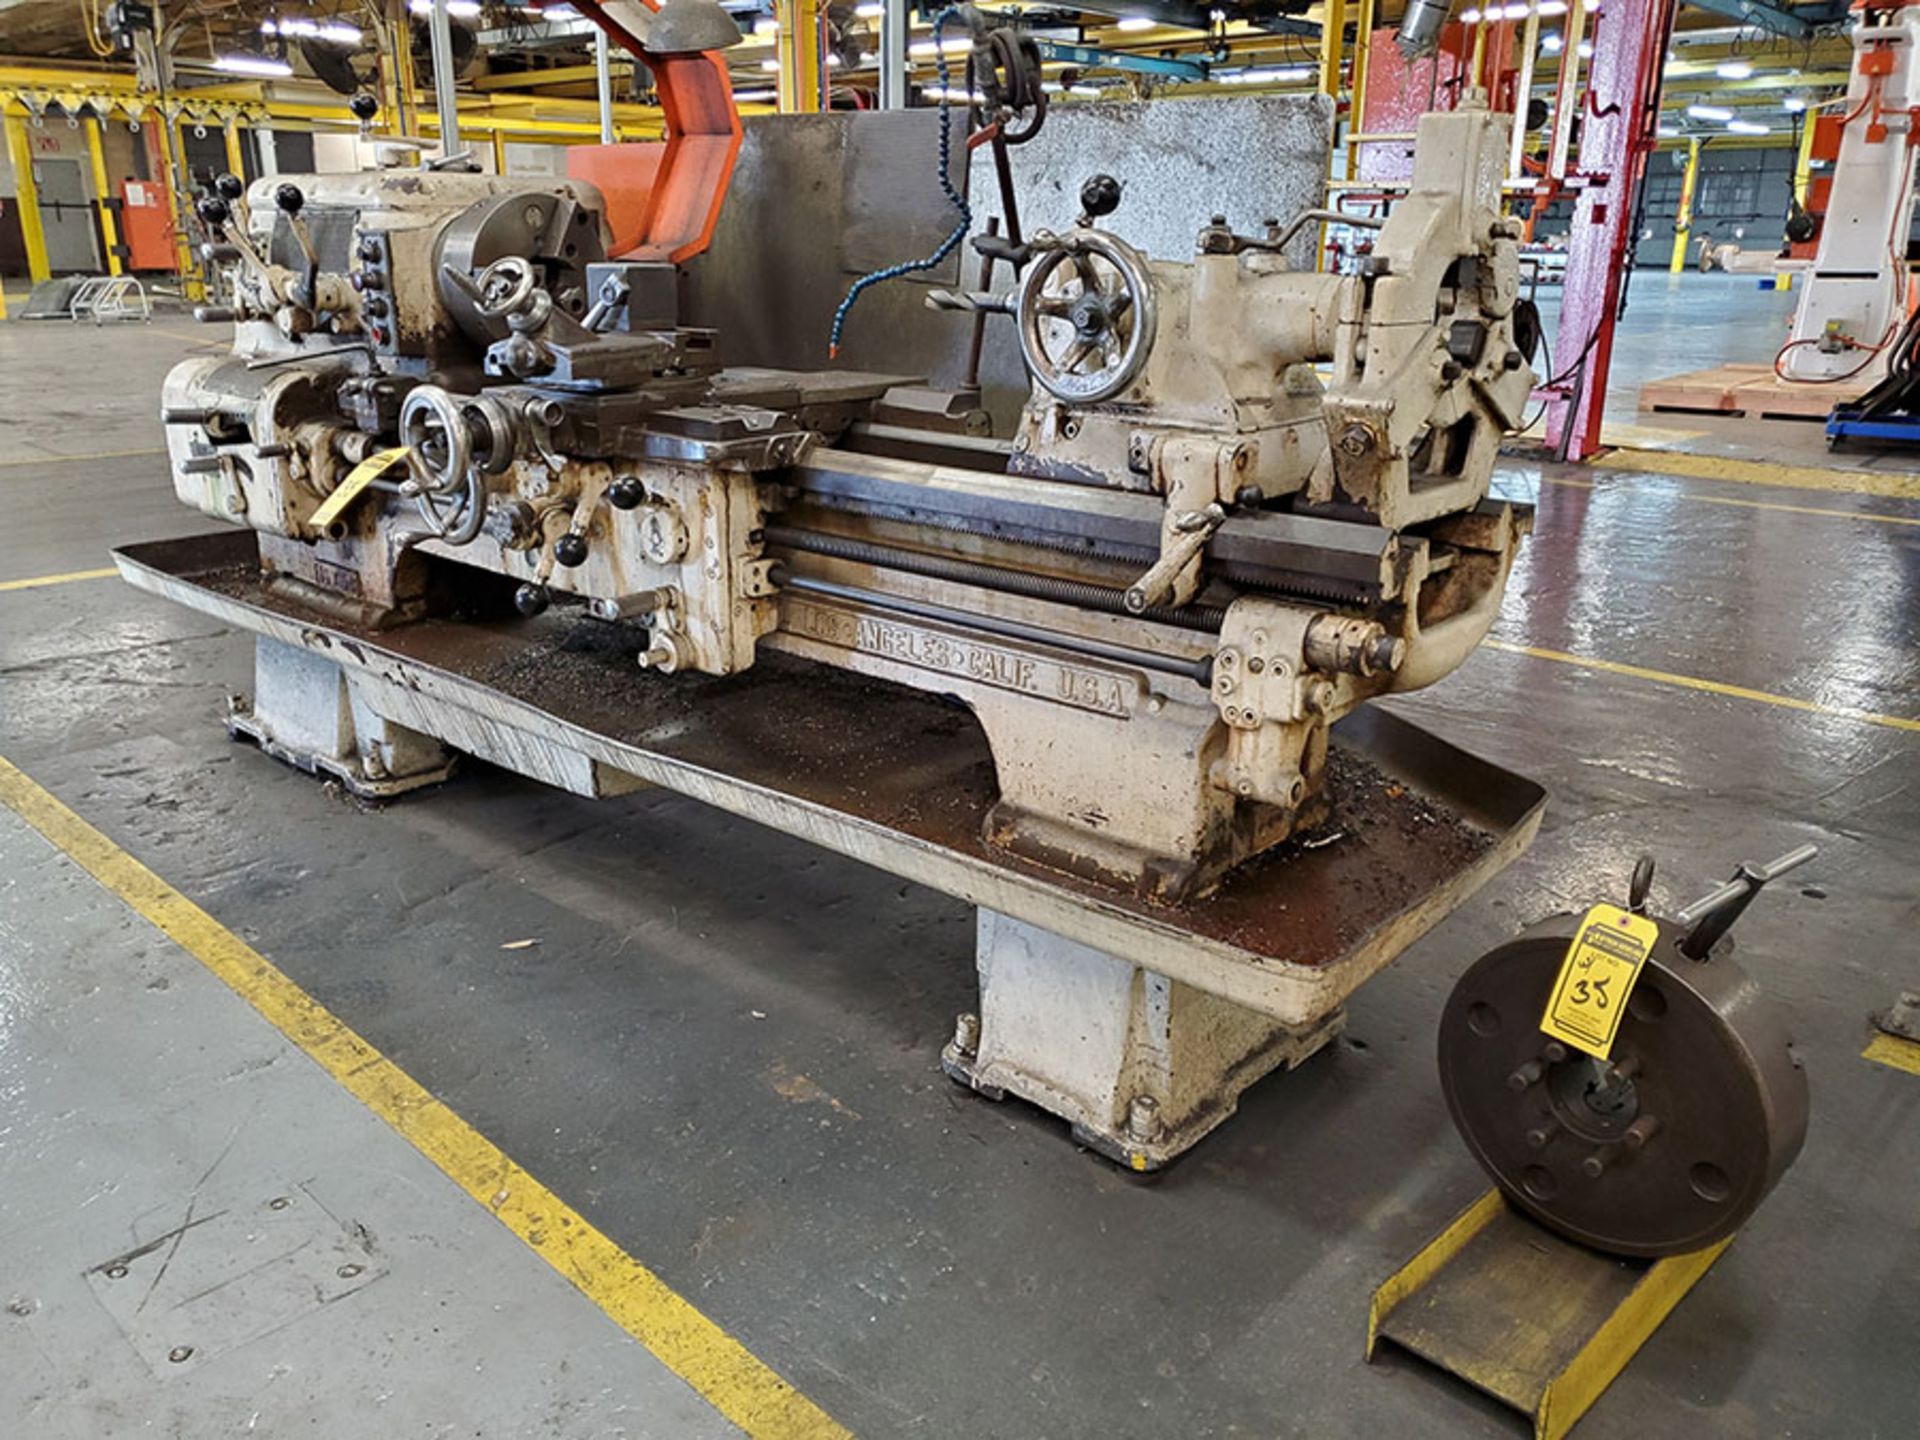 AXELSON 8' ENGINE LATHE, S/N 4866, SIZE 16’’, 18 1/2’’ SWING, 54’’ BETWEEN CENTER, 12’’ 3-JAW CHUCK, - Image 3 of 13